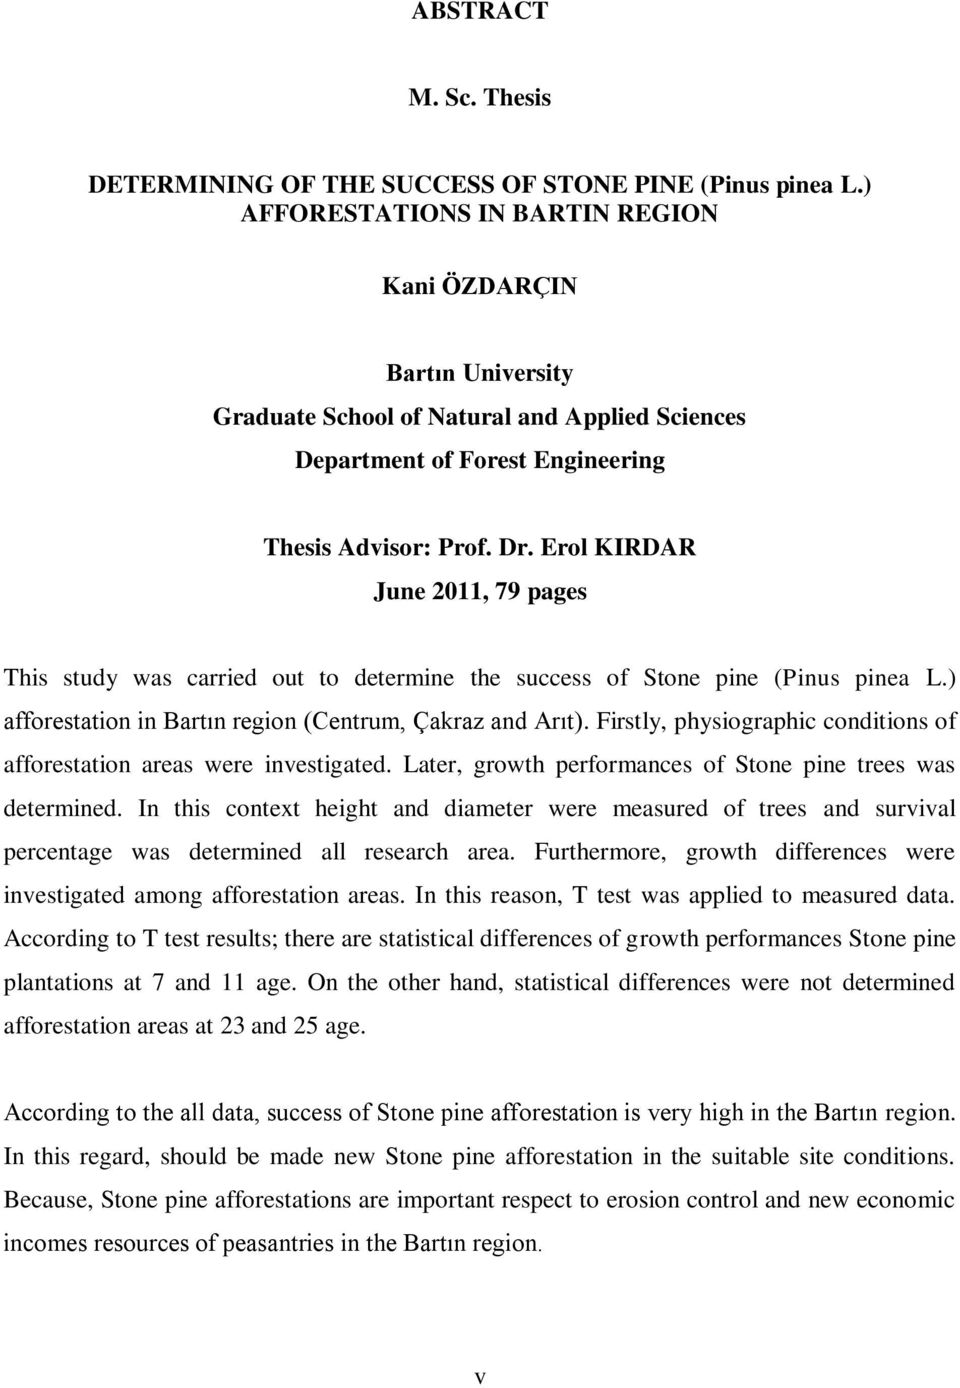 Erol KIRDAR June 2011, 79 pages This study was carried out to determine the success of Stone pine (Pinus pinea L.) afforestation in Bartın region (Centrum, Çakraz and Arıt).